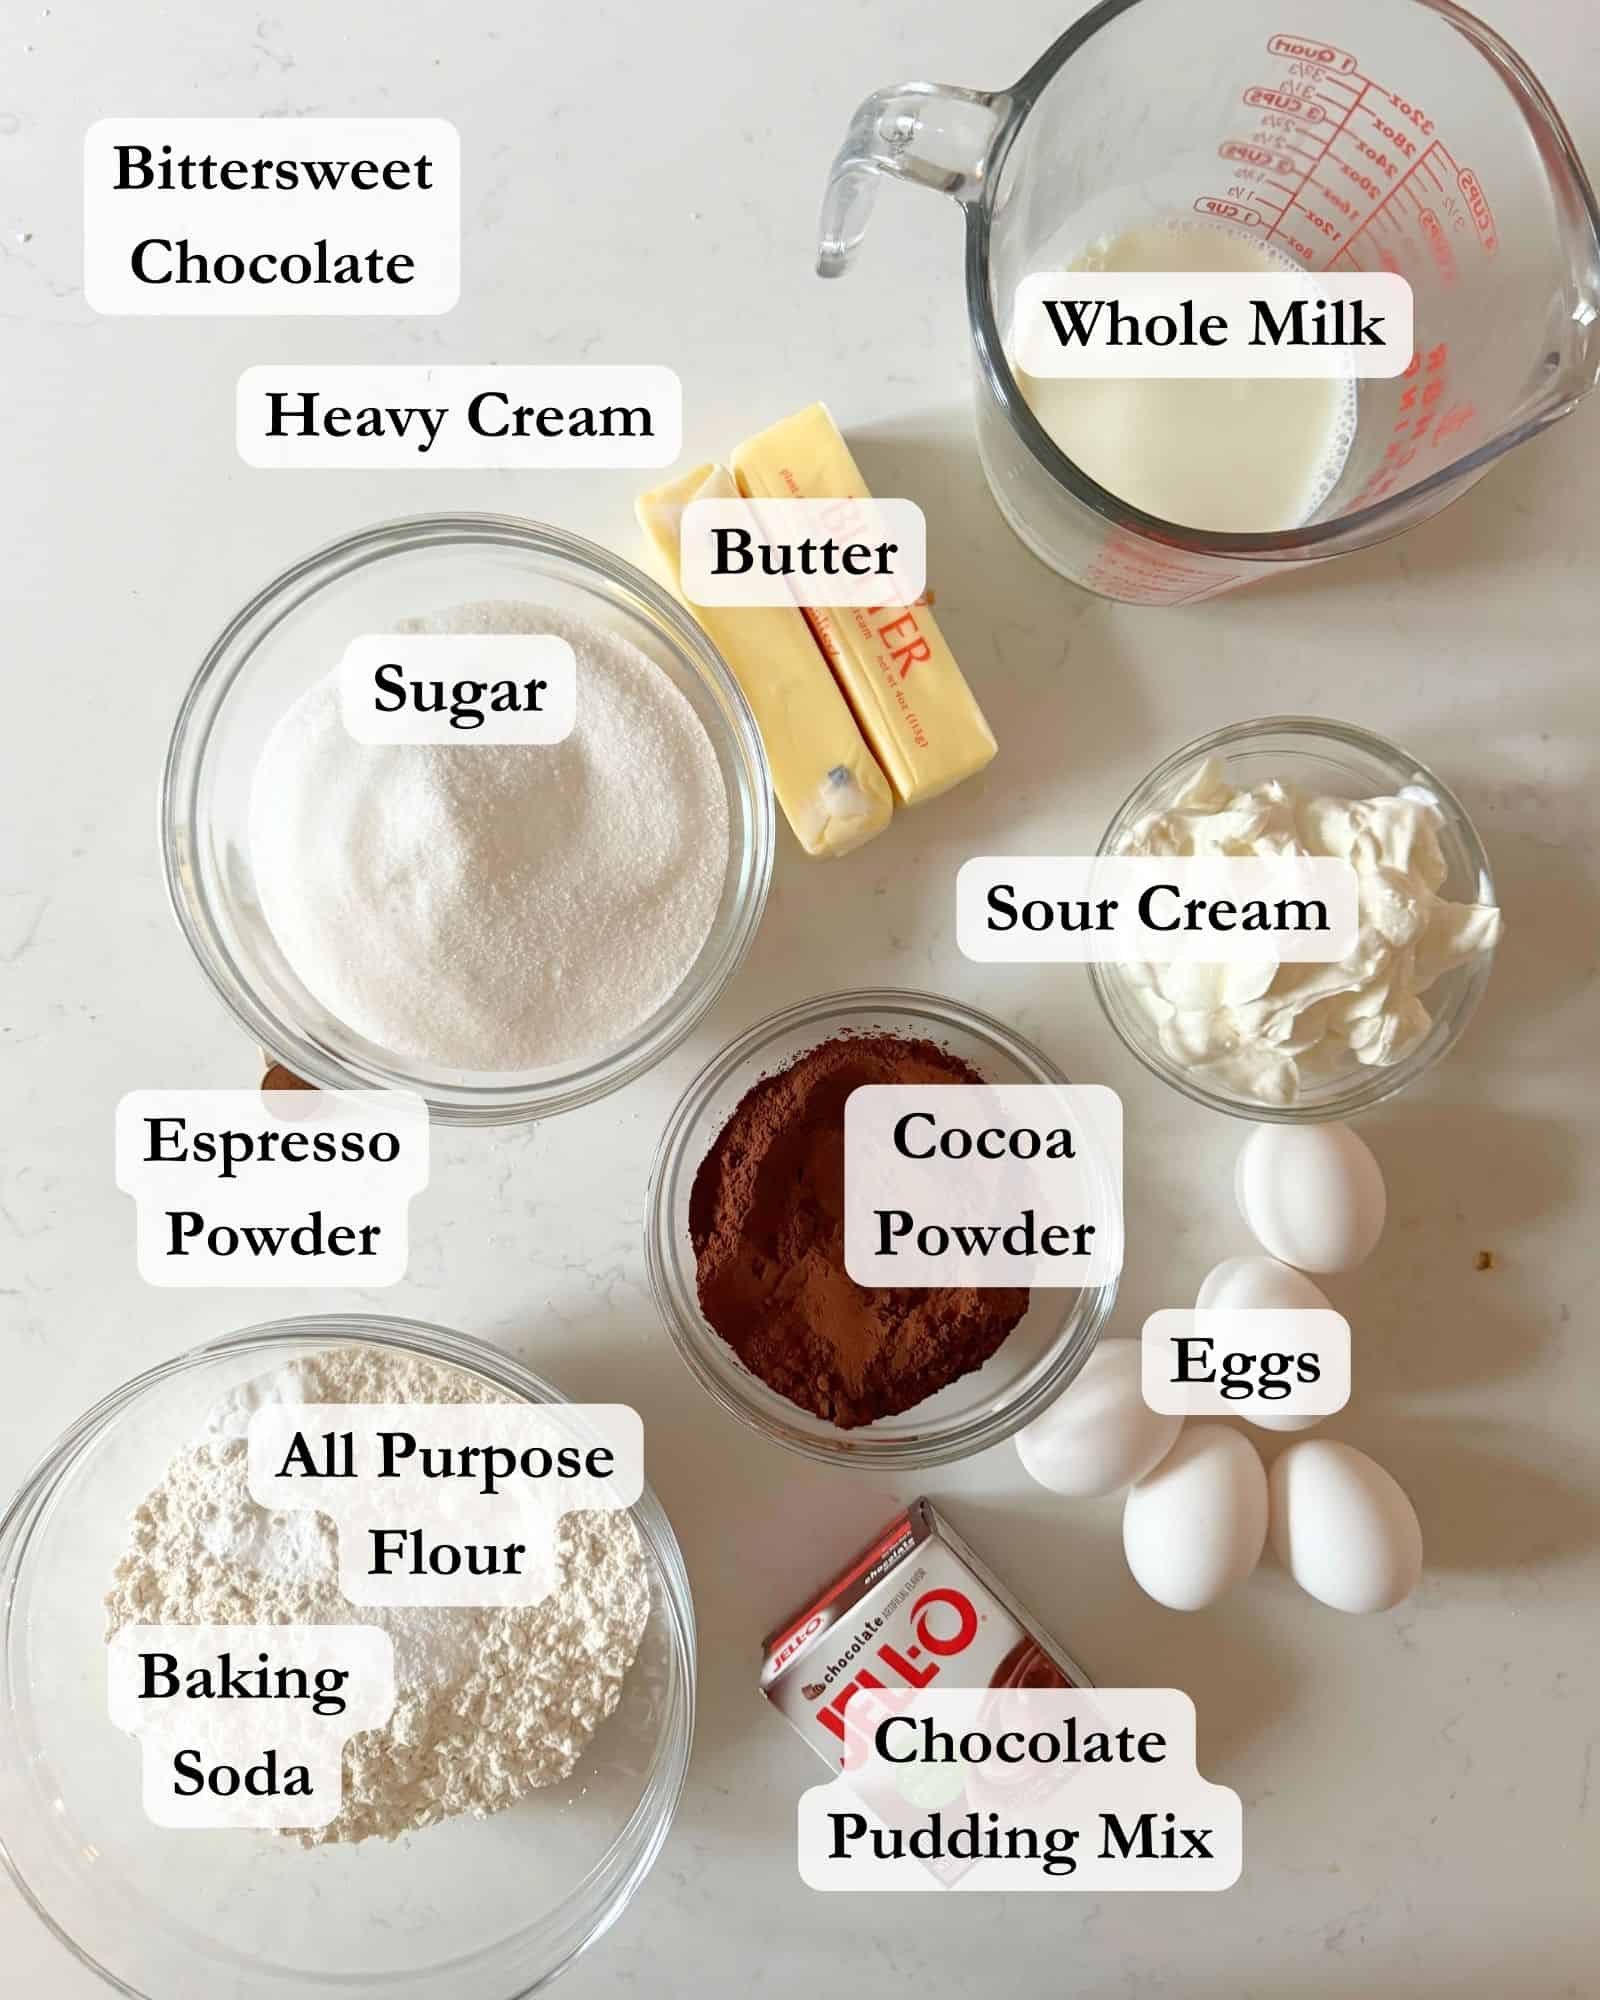 chocolate pound cake ingredients on a white surface in small bowls. Flour, sugar, butter, pudding mix, eggs, baking soda, espresso powder, cocoa powder, bittersweet. chocolate, heavy cream, sour cream, and whole milk